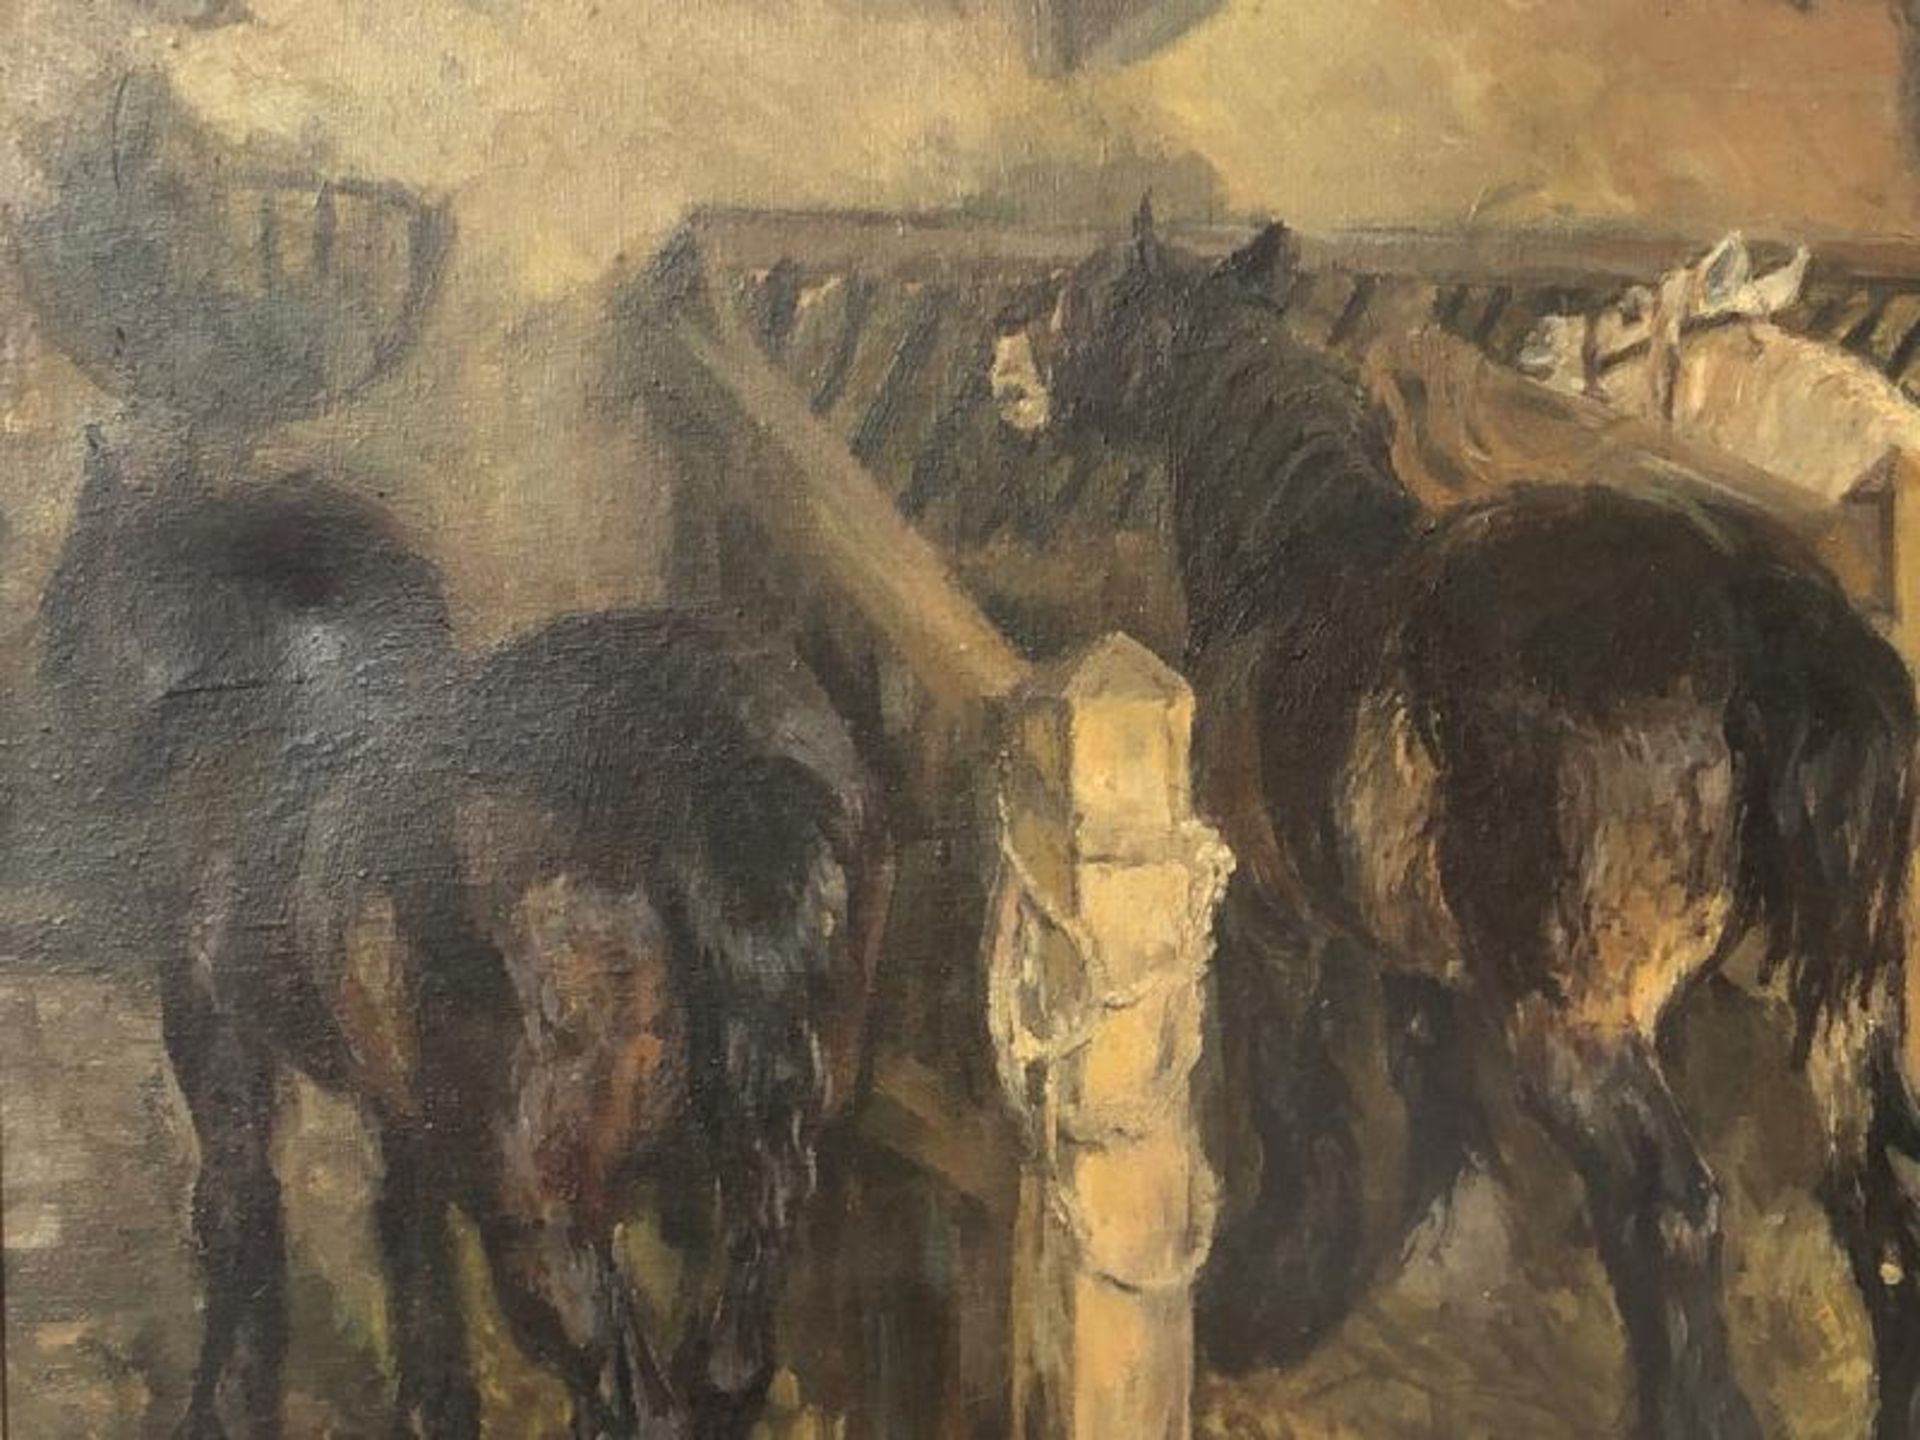 Helen Collins (1921 - 1990) " The Stables at Pursers Farm" possibly 2nd study , oil on canvas, - Image 2 of 7